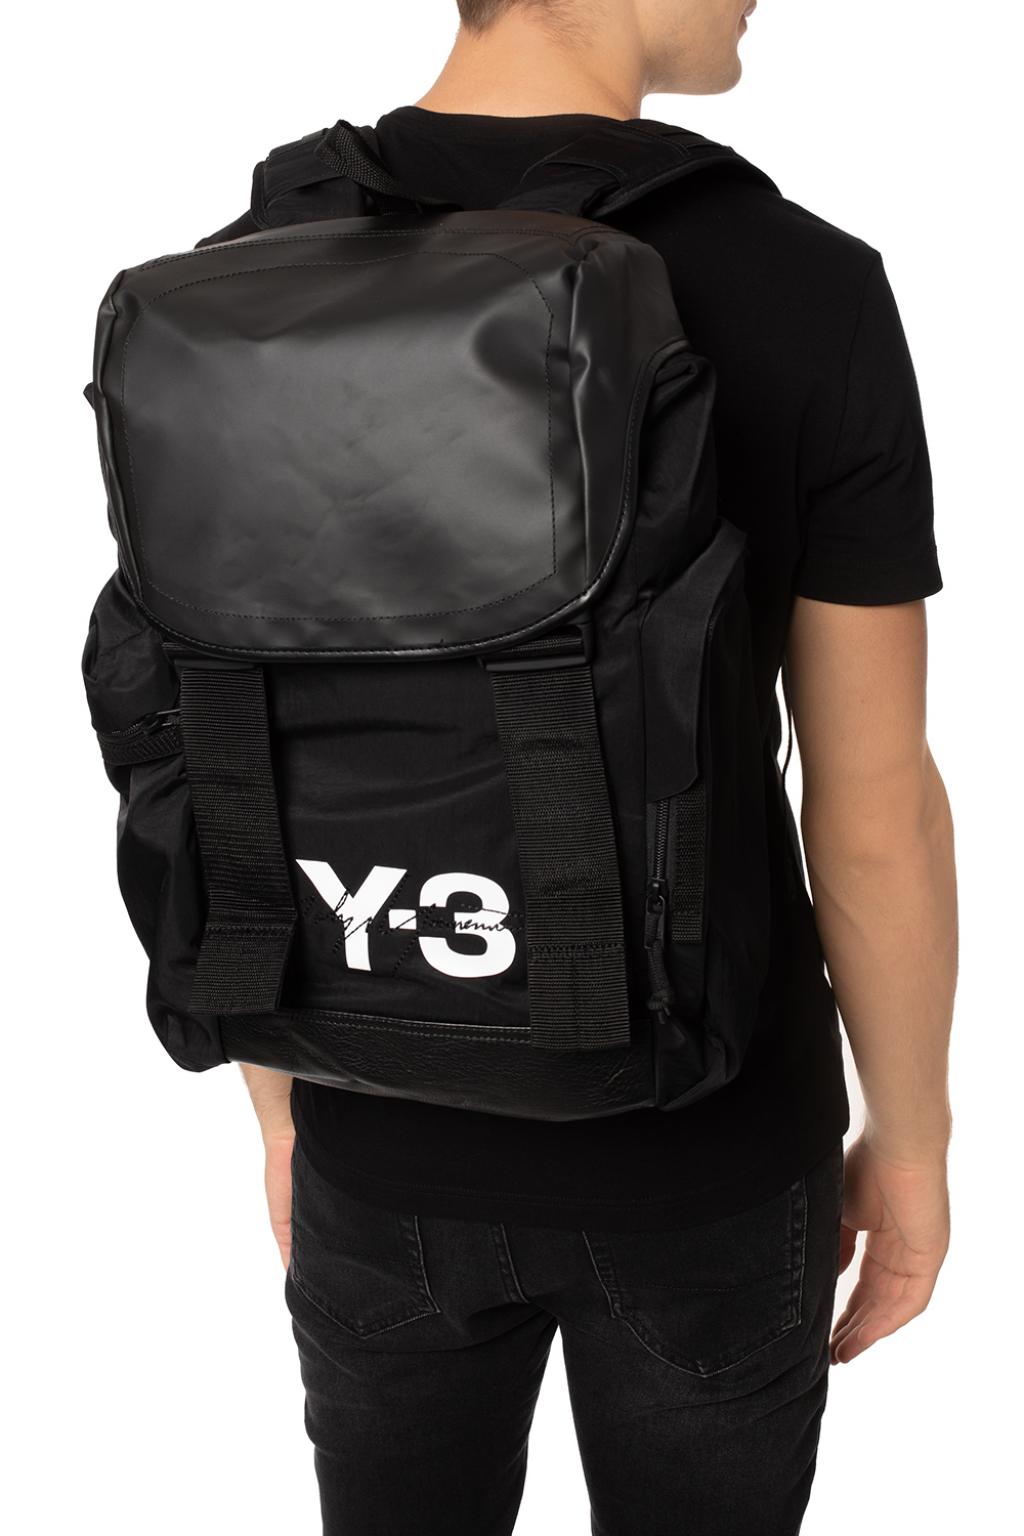 Y-3 Mobility バックパック-